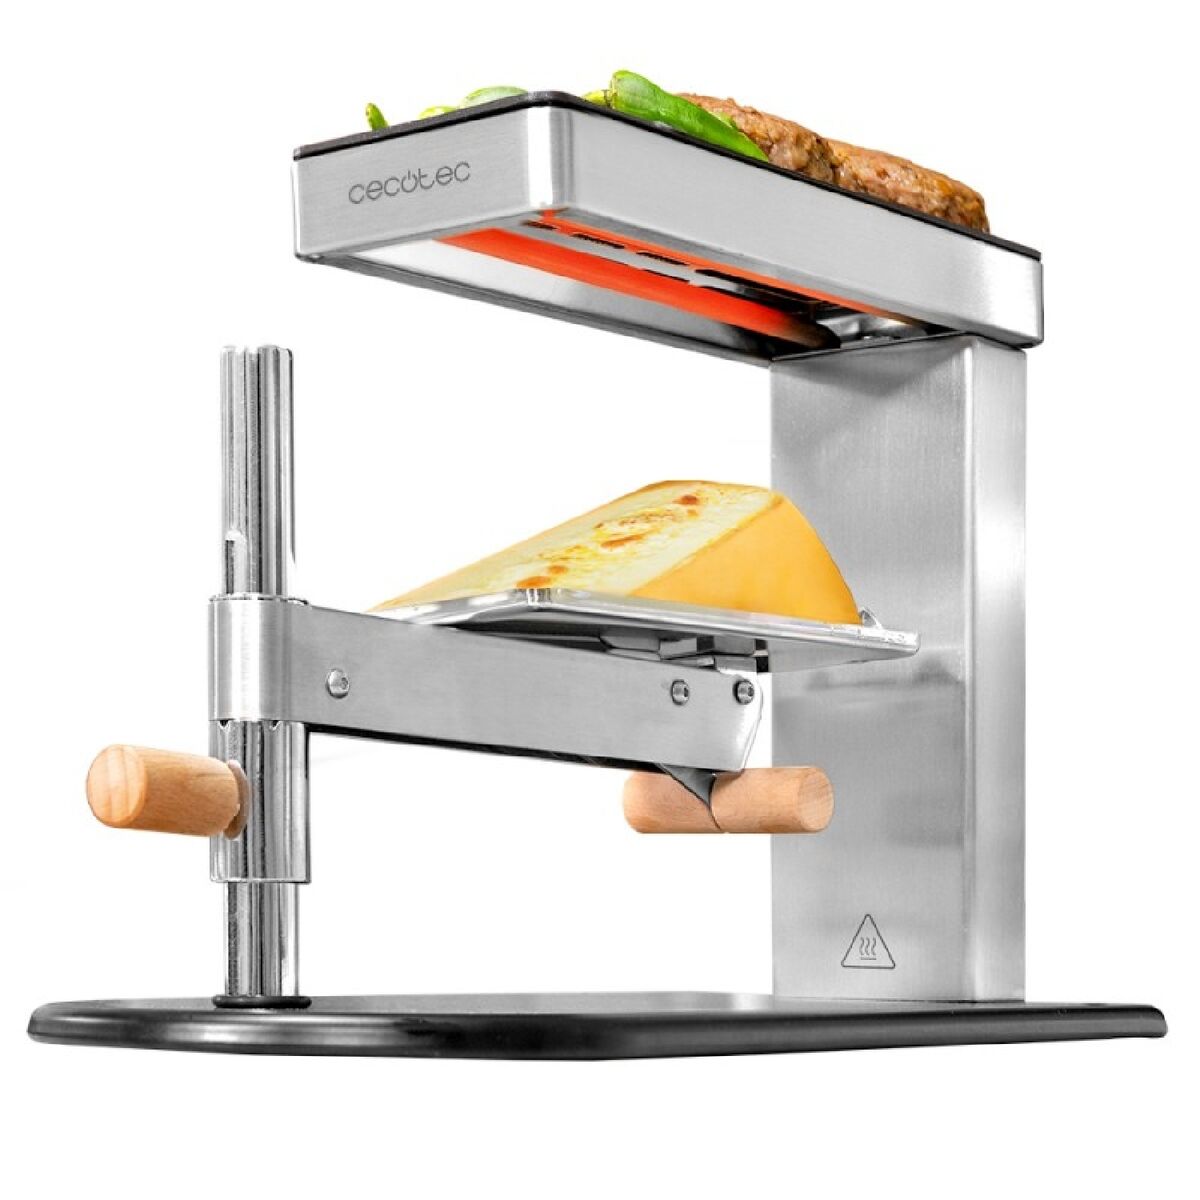 Rotary Cheese Grater Cecotec Cheese&Grill 6000 Inox